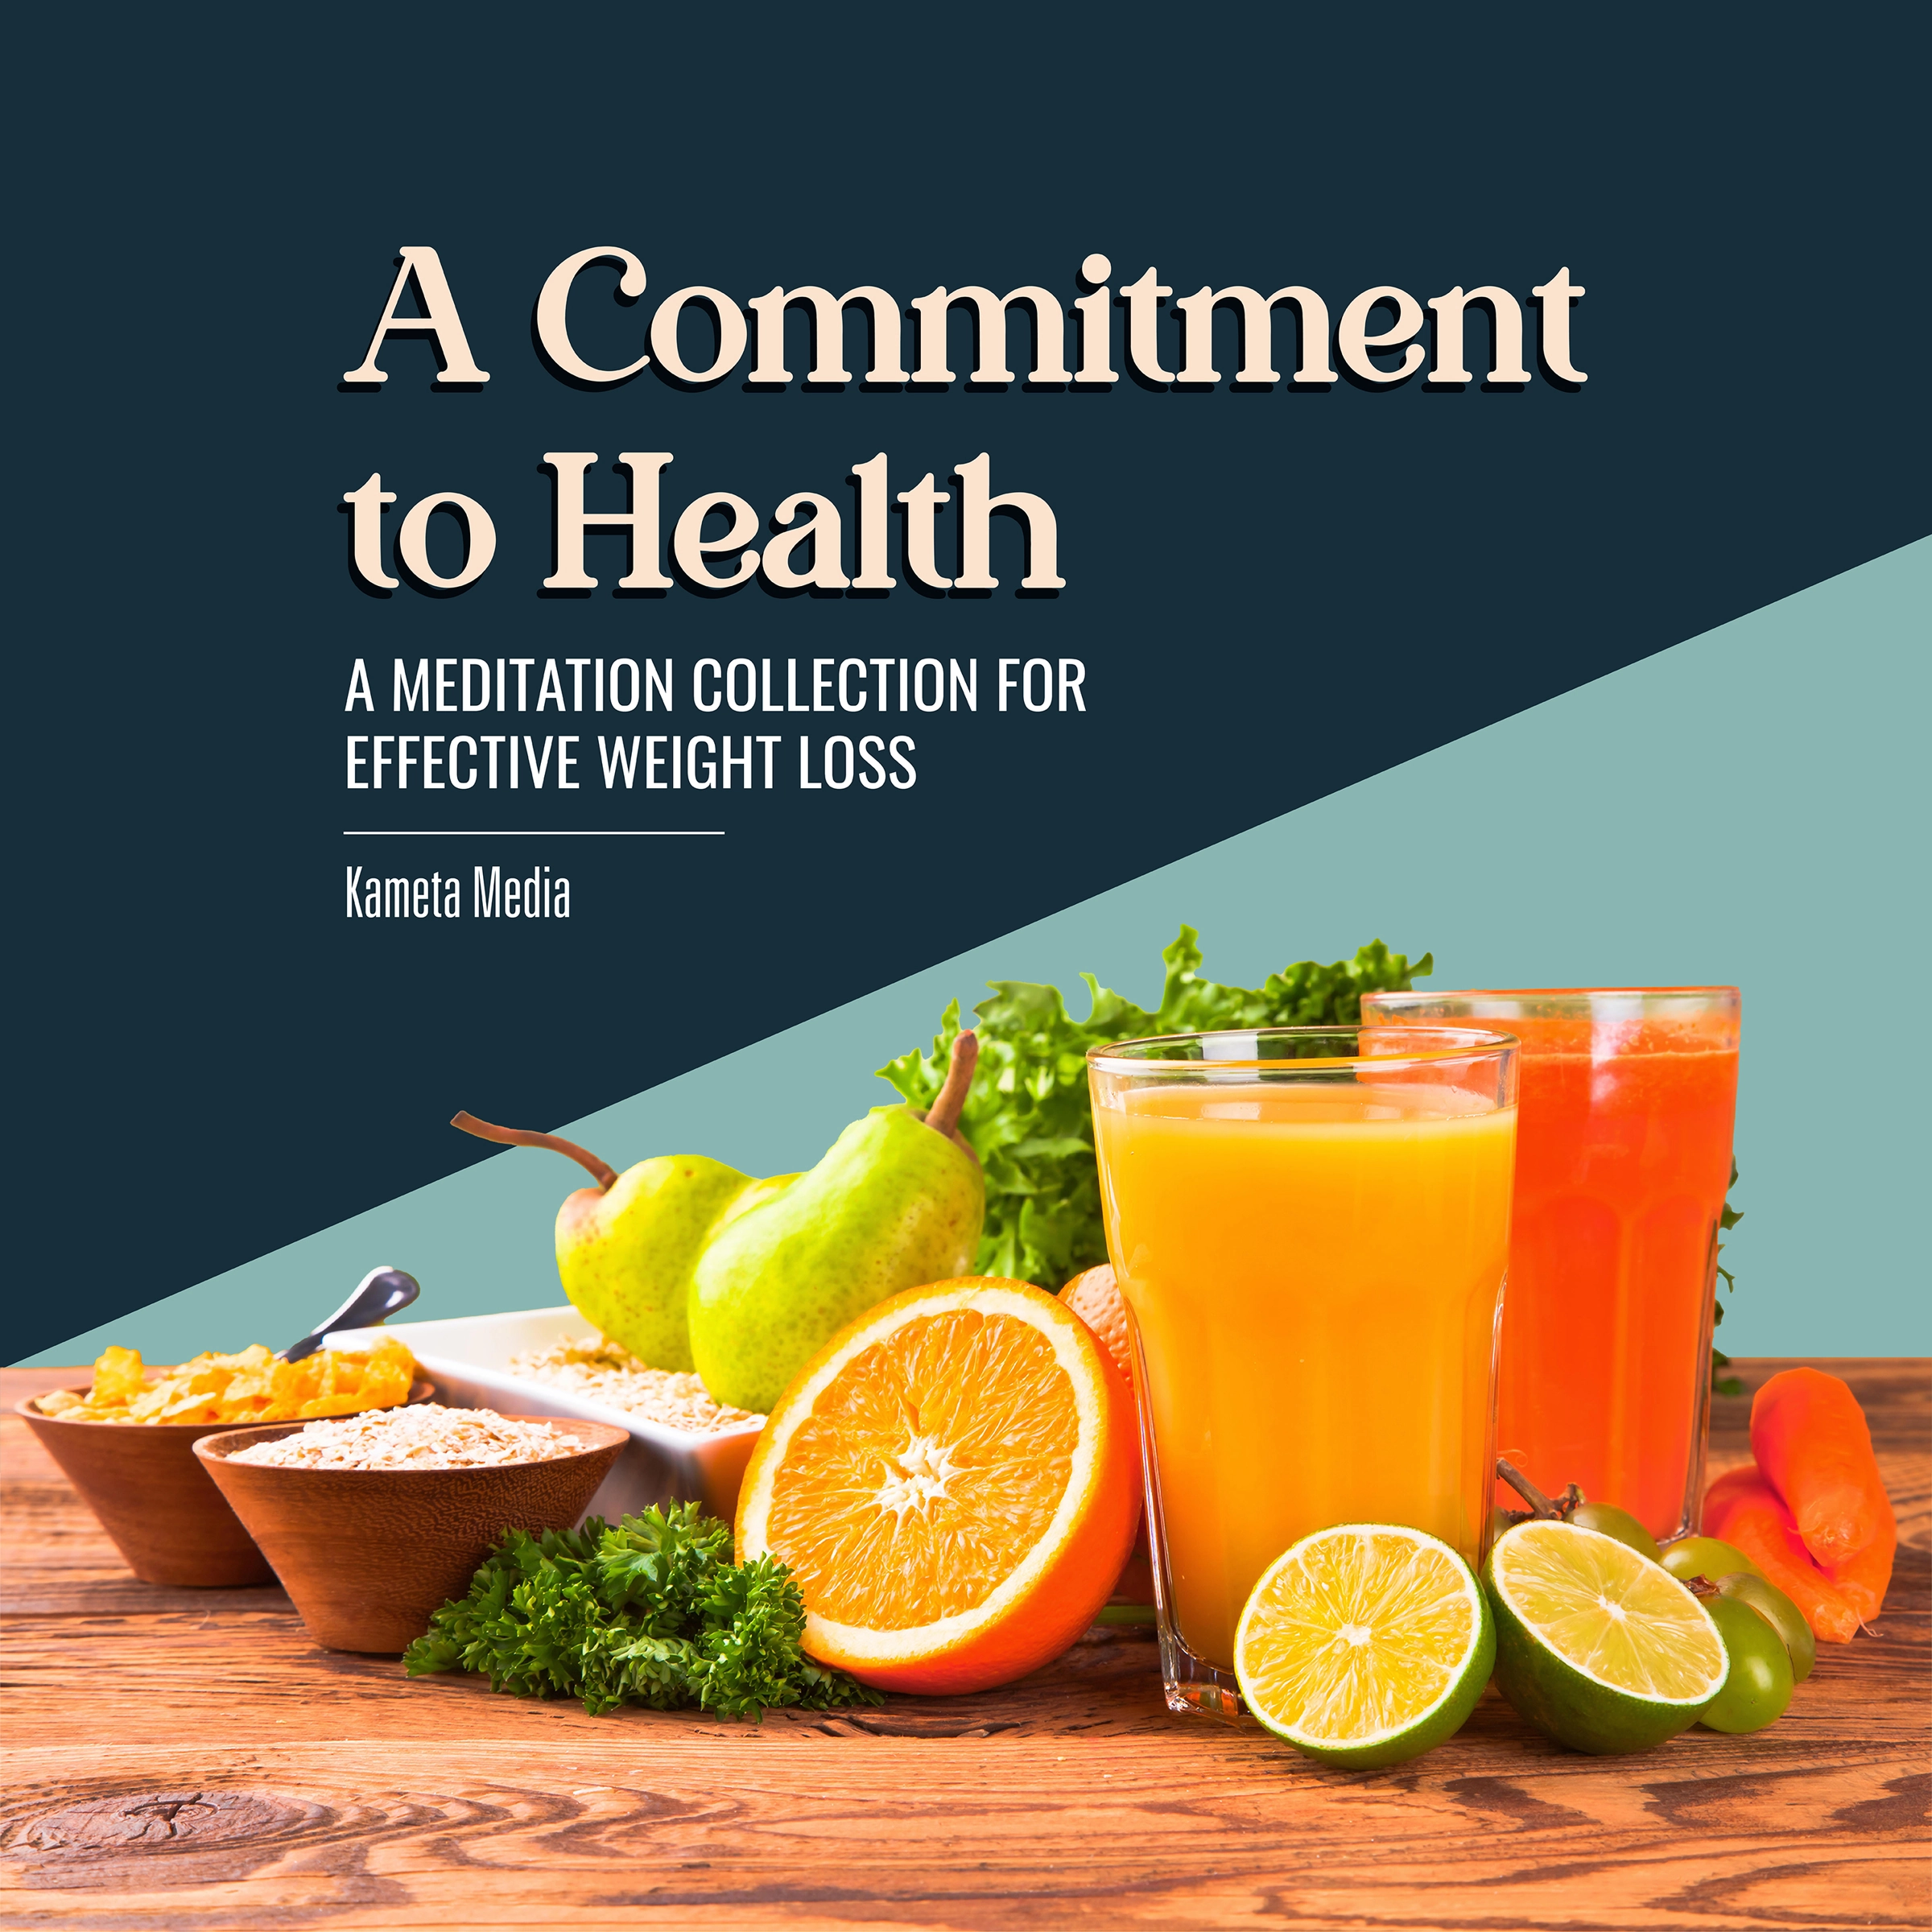 A Commitment to Health: A Meditation Collection for Effective Weight Loss Audiobook by Kameta Media